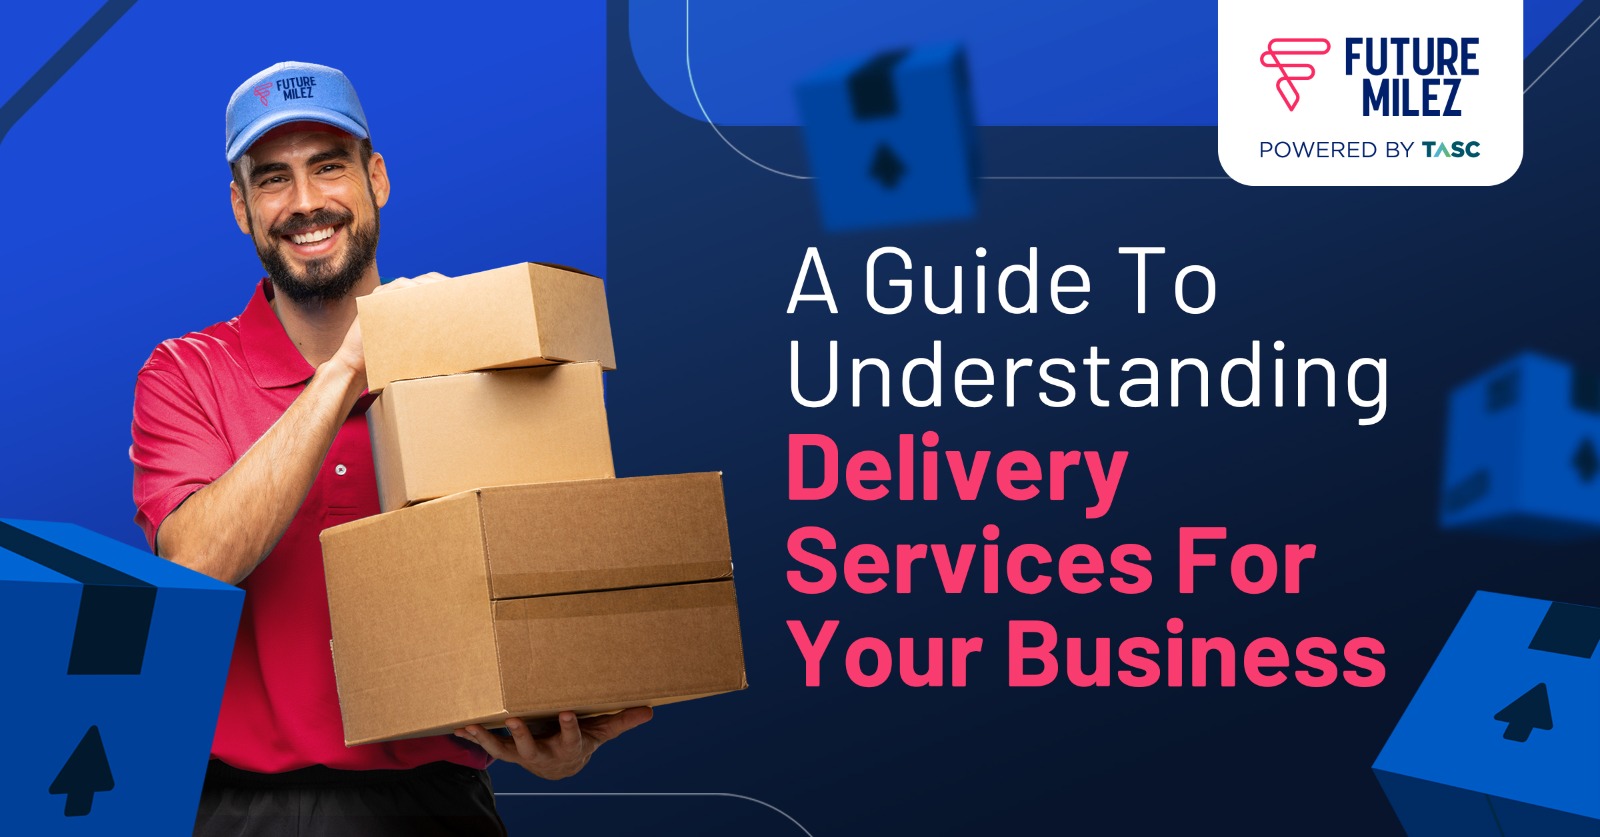 A Guide To Understanding Delivery Services For Your Business